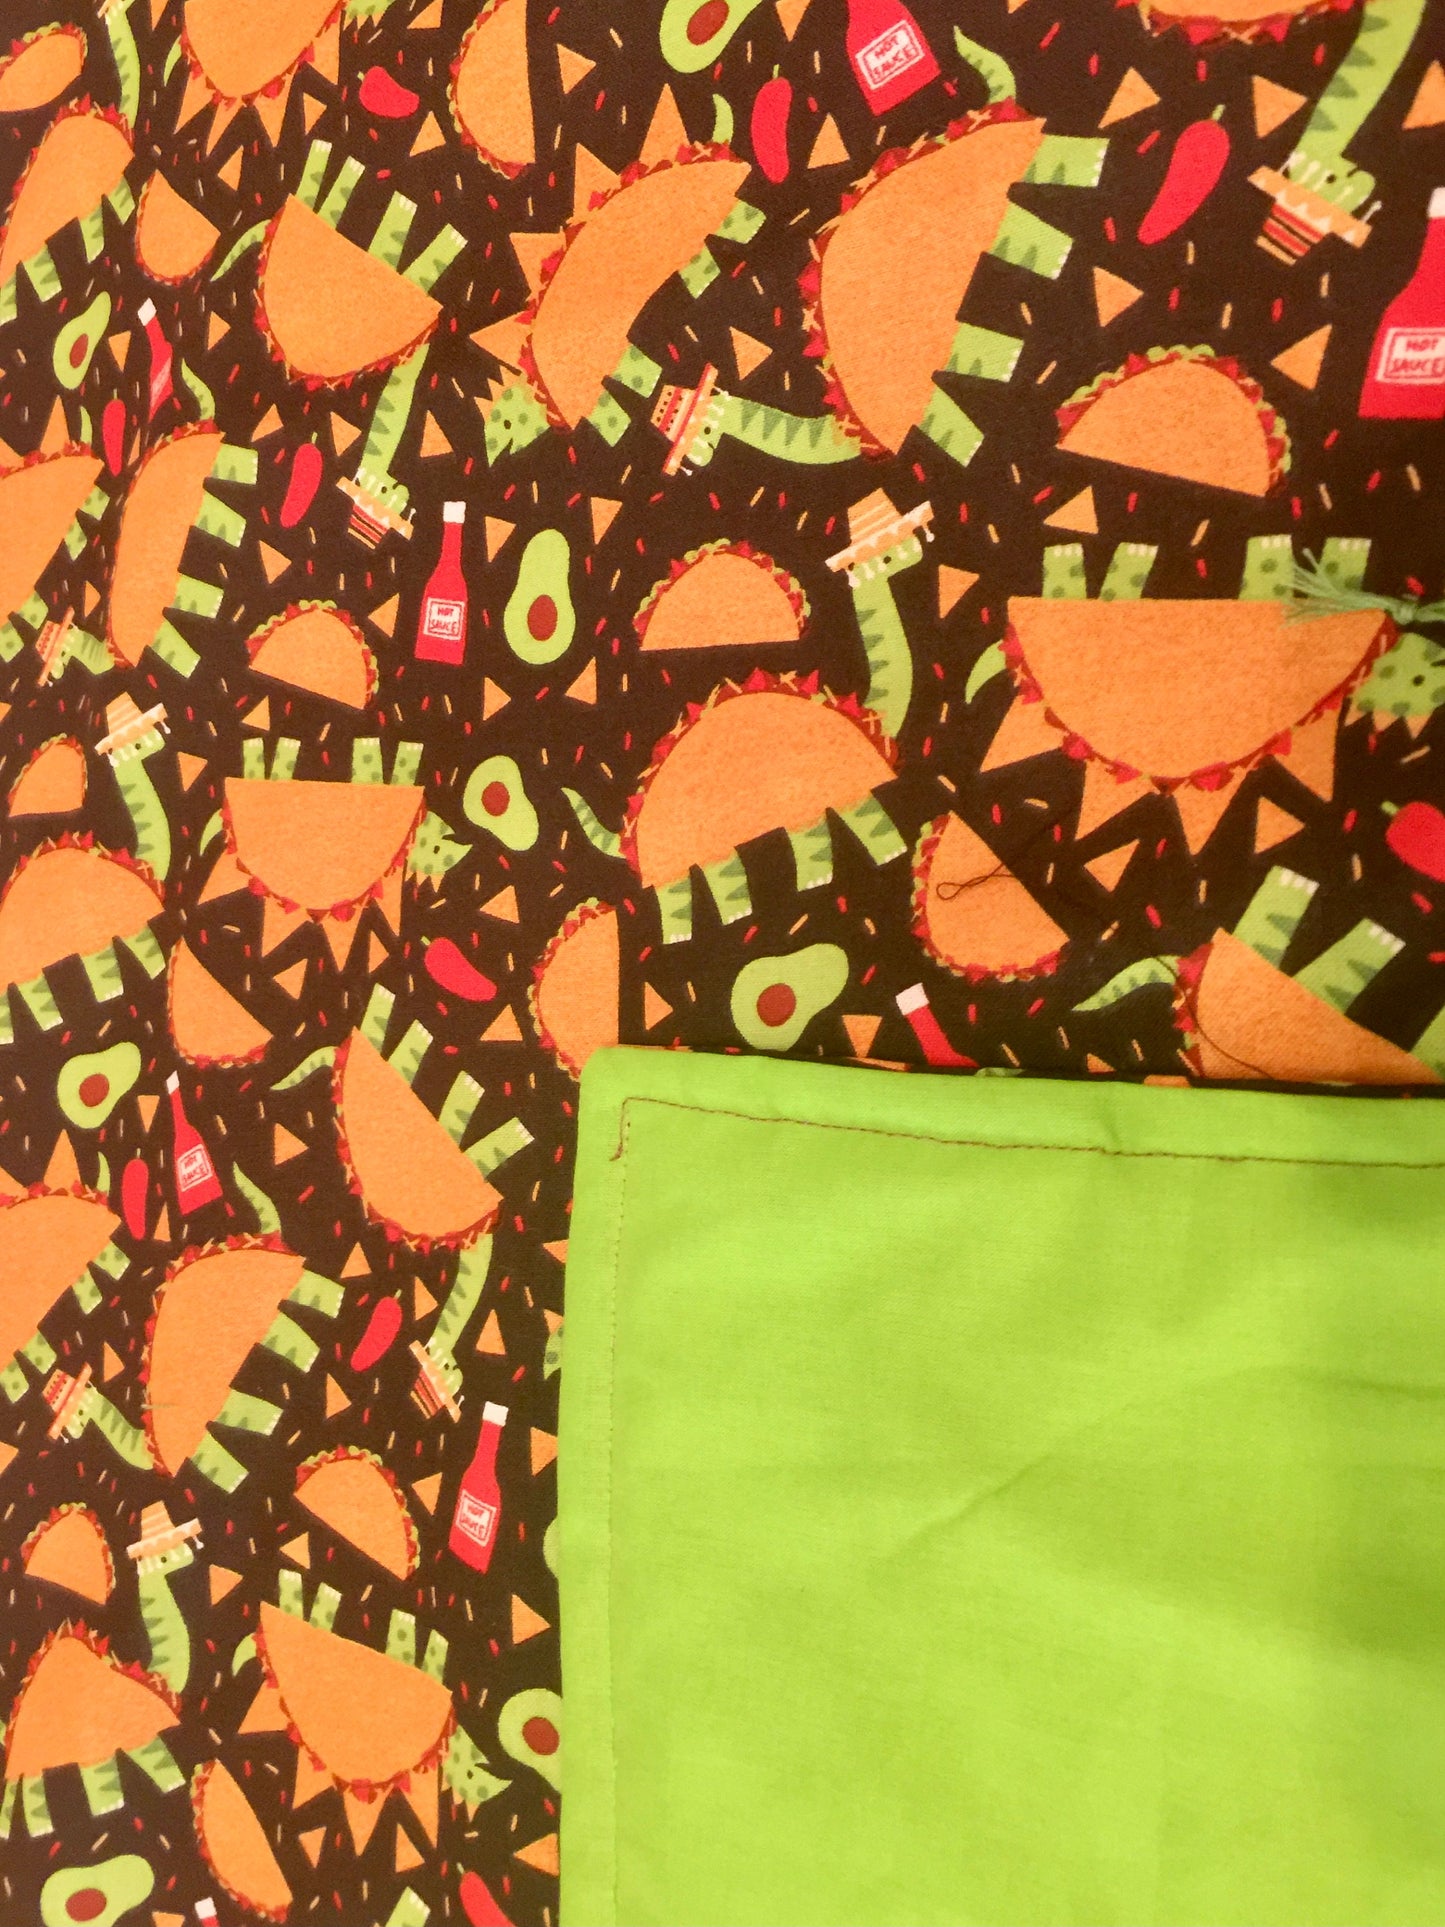 Love Tacos? Love Dinosaurs? Then this is your ultimate cool blanket!